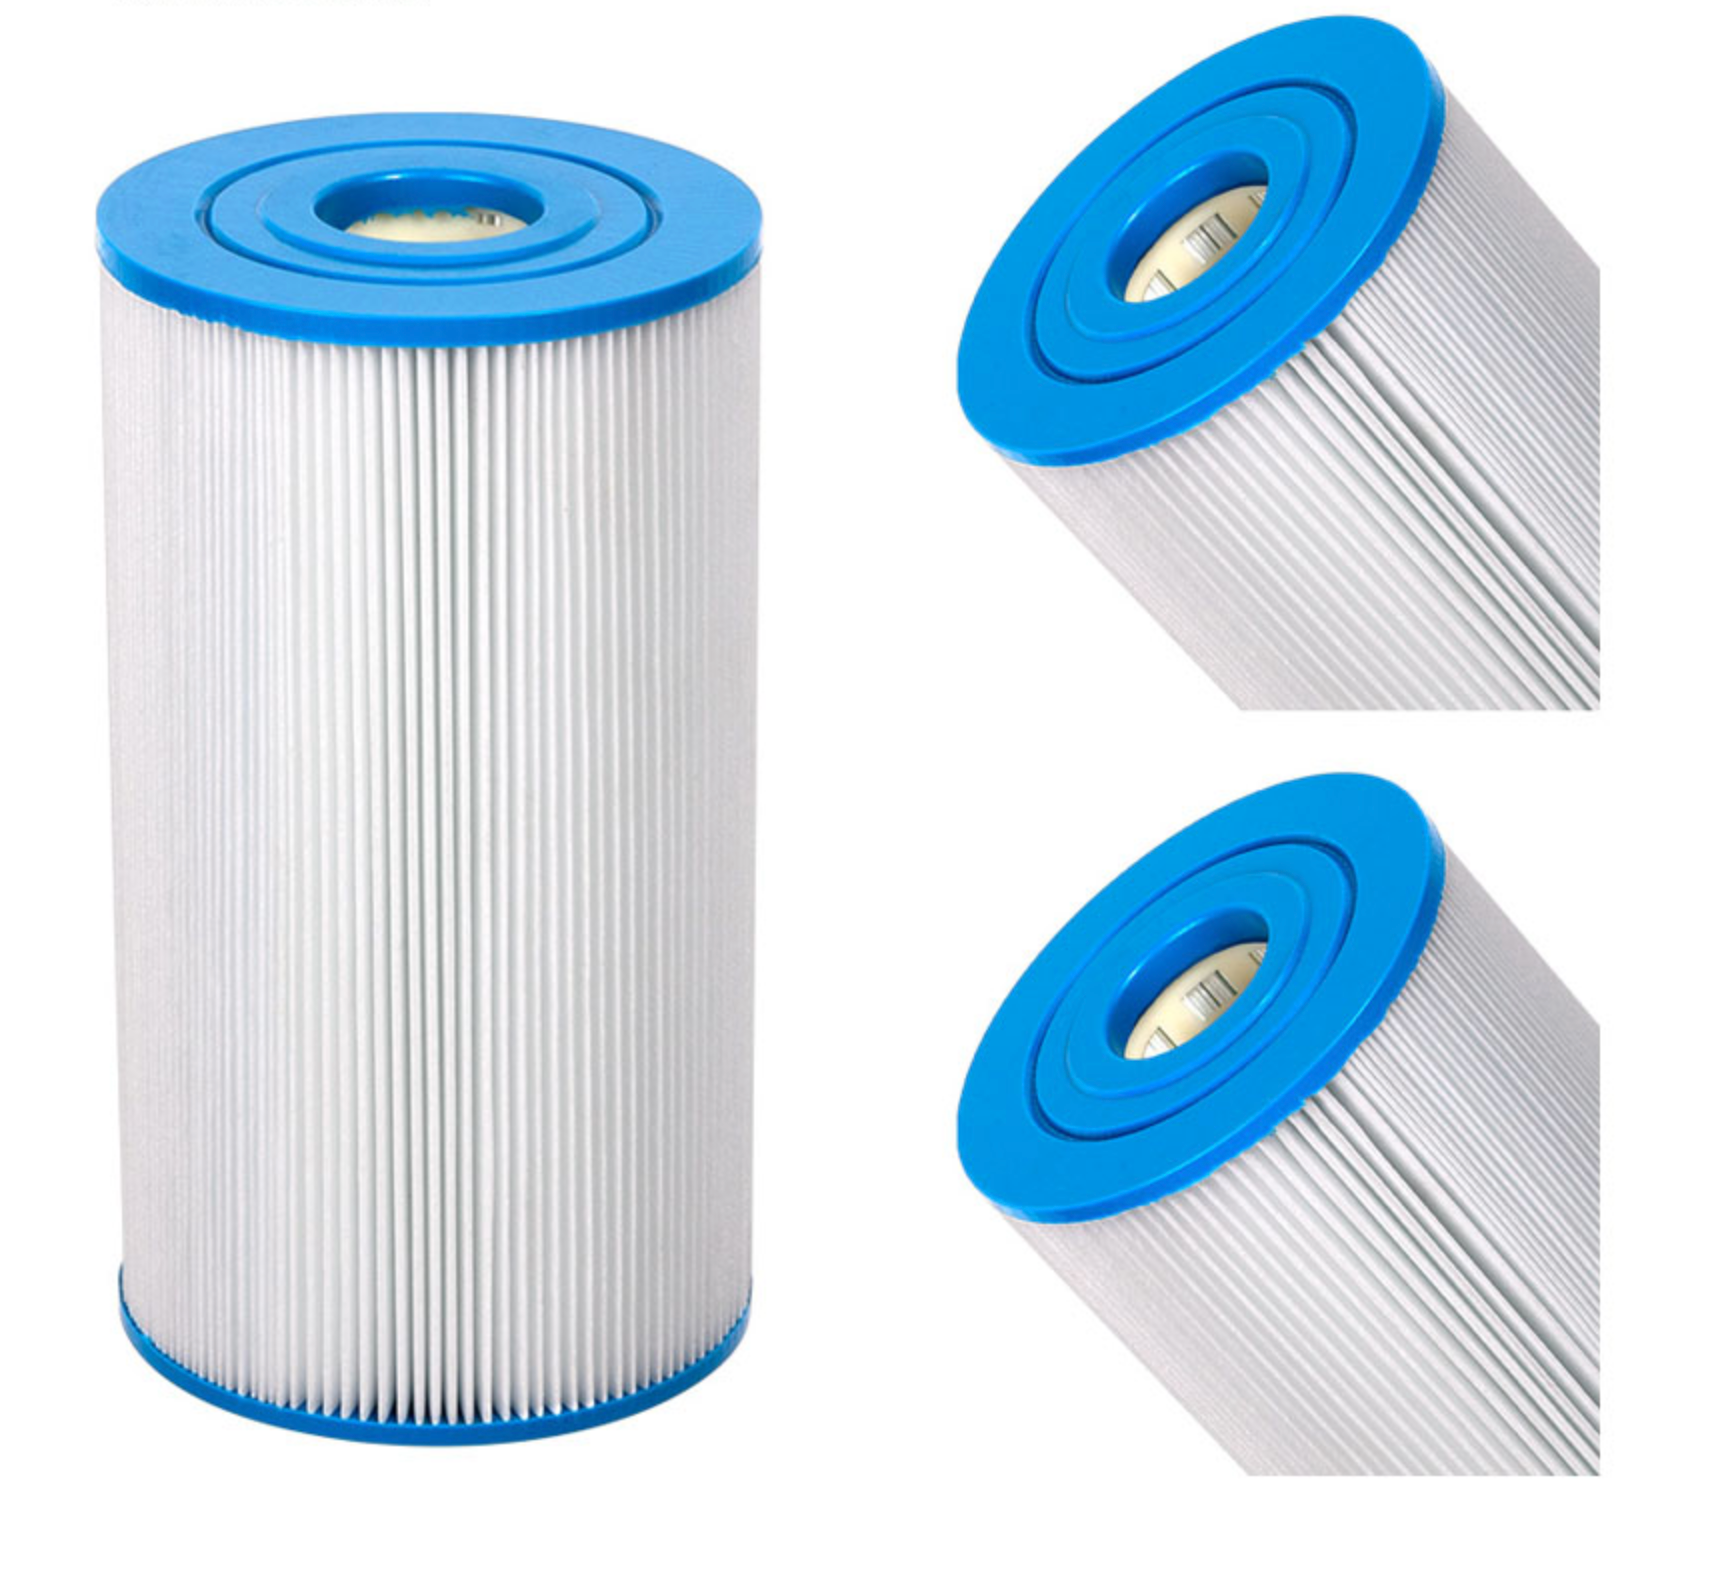 Darlly 60301 Filter Cartridge Replaces PWK30, C-6330, FC-3915 and 60301